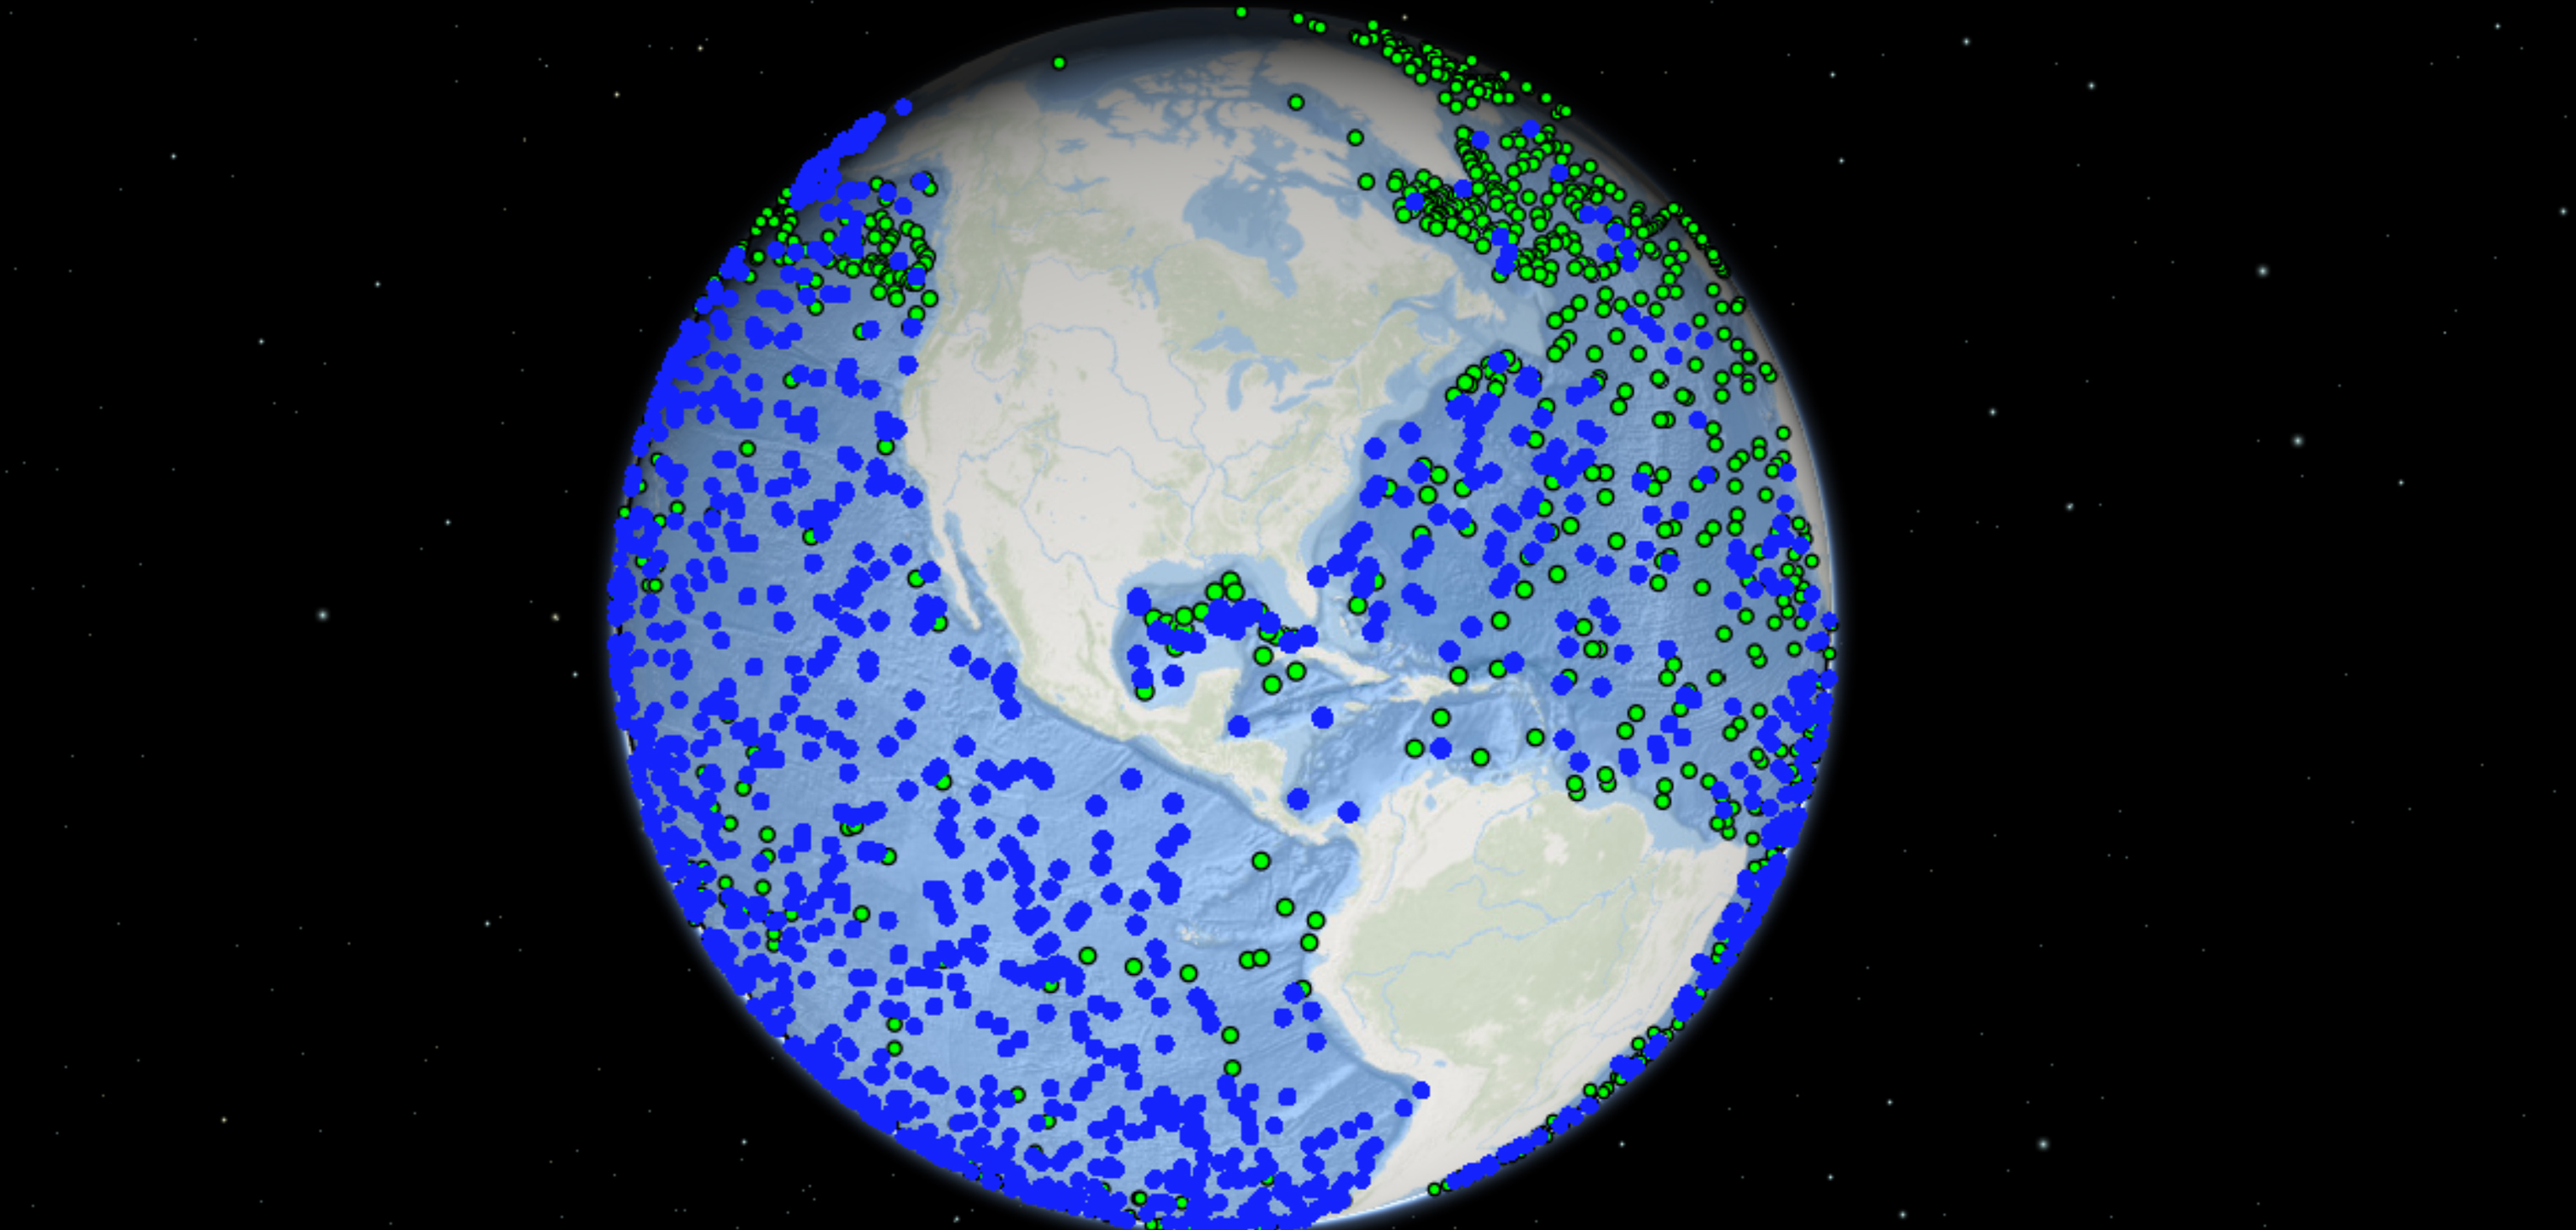 This interactive map identifies worldwide sites of the Argo array. As shown by blue dots, the U.S. provides about half of this array, funded mostly by NOAA with contributions from partner agencies. Green dots reflect the contributions of other nations.